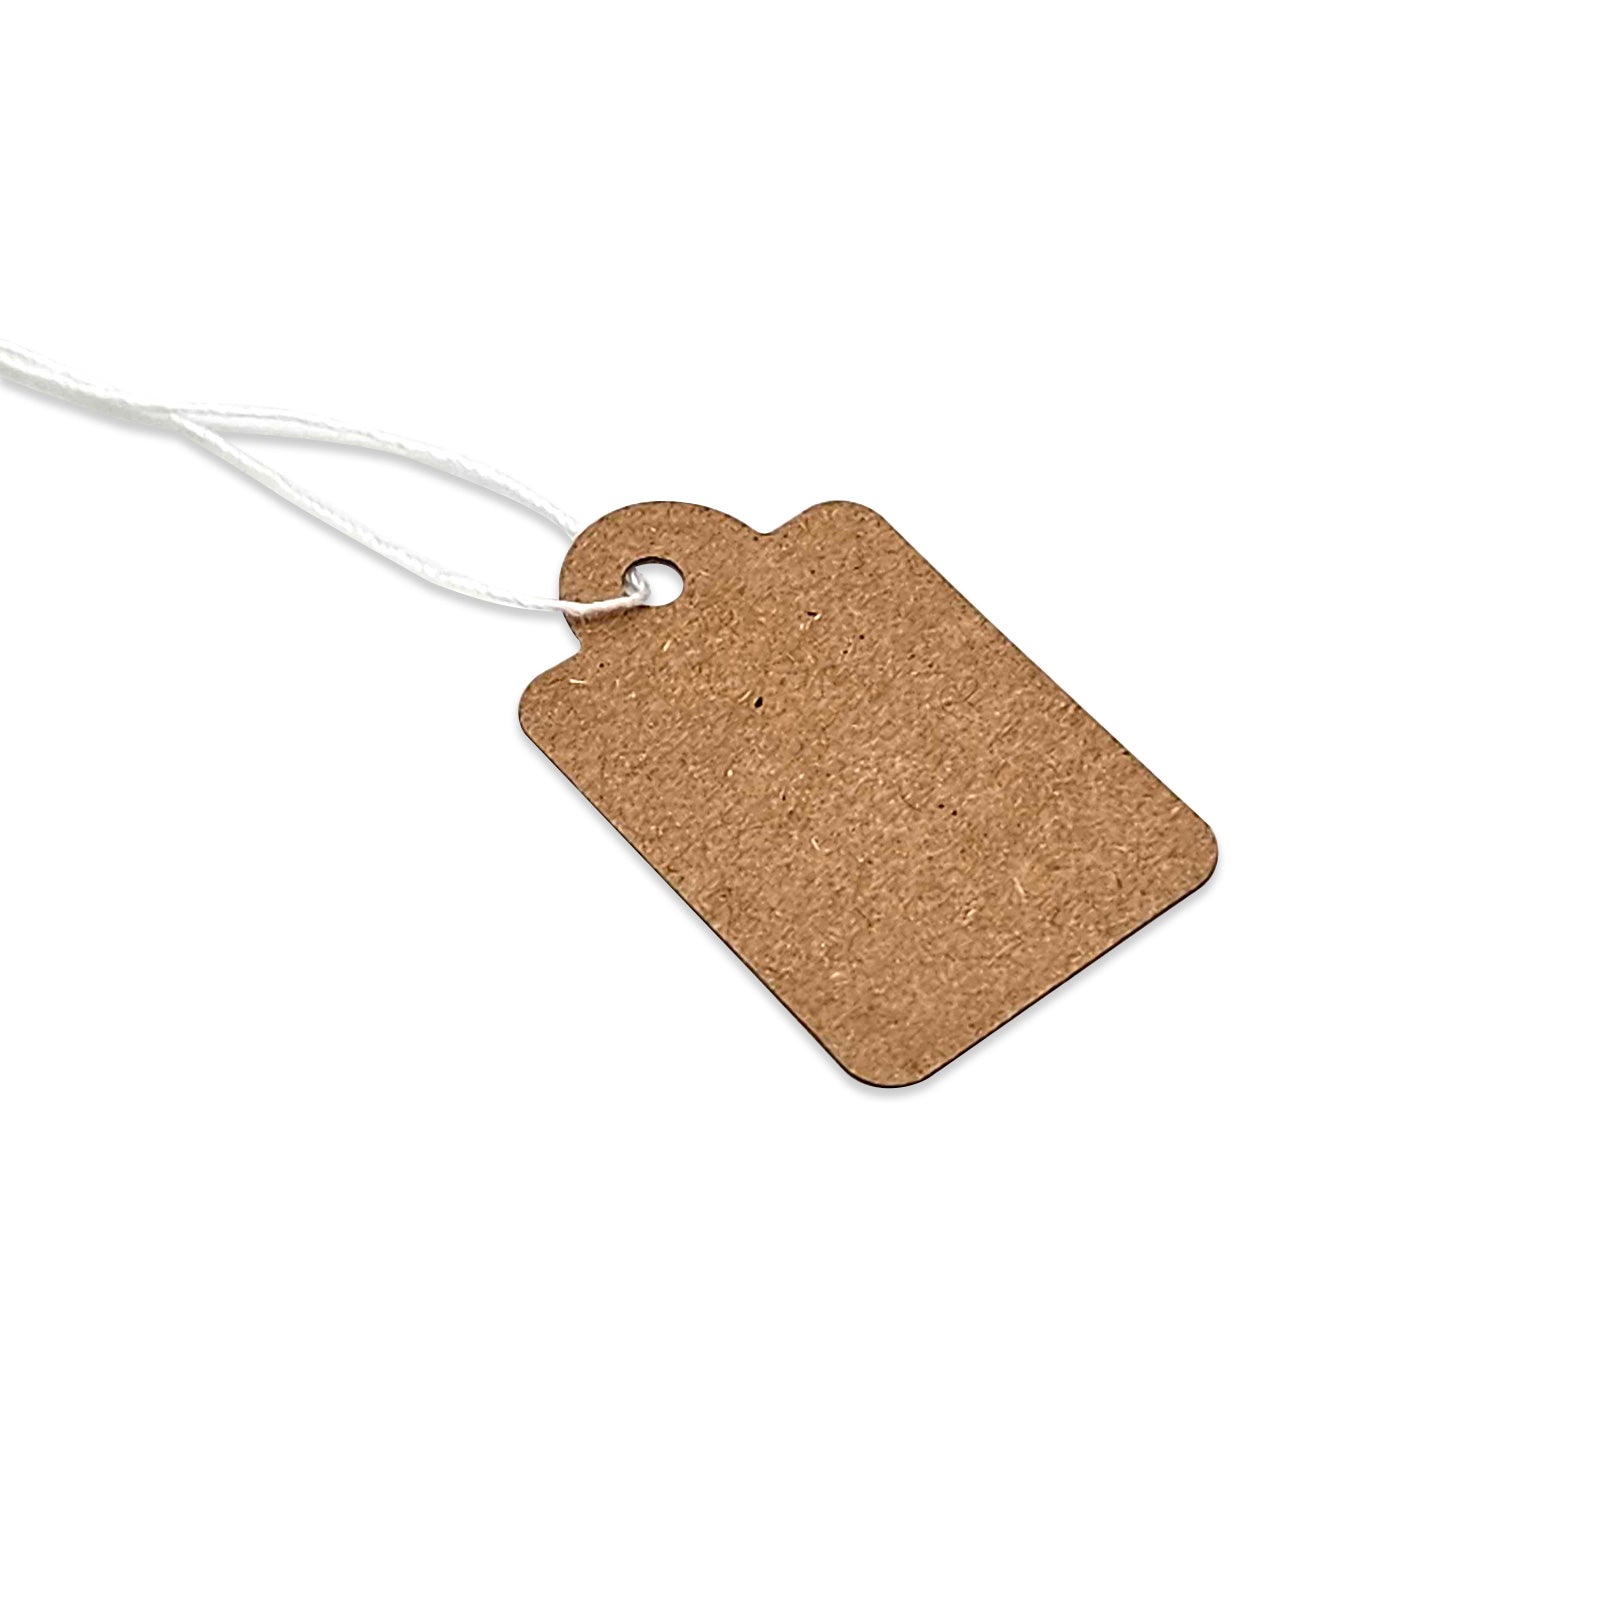 100-Pack of 22 x 35mm Kraft Paper Knotted String Price Tags – JPI